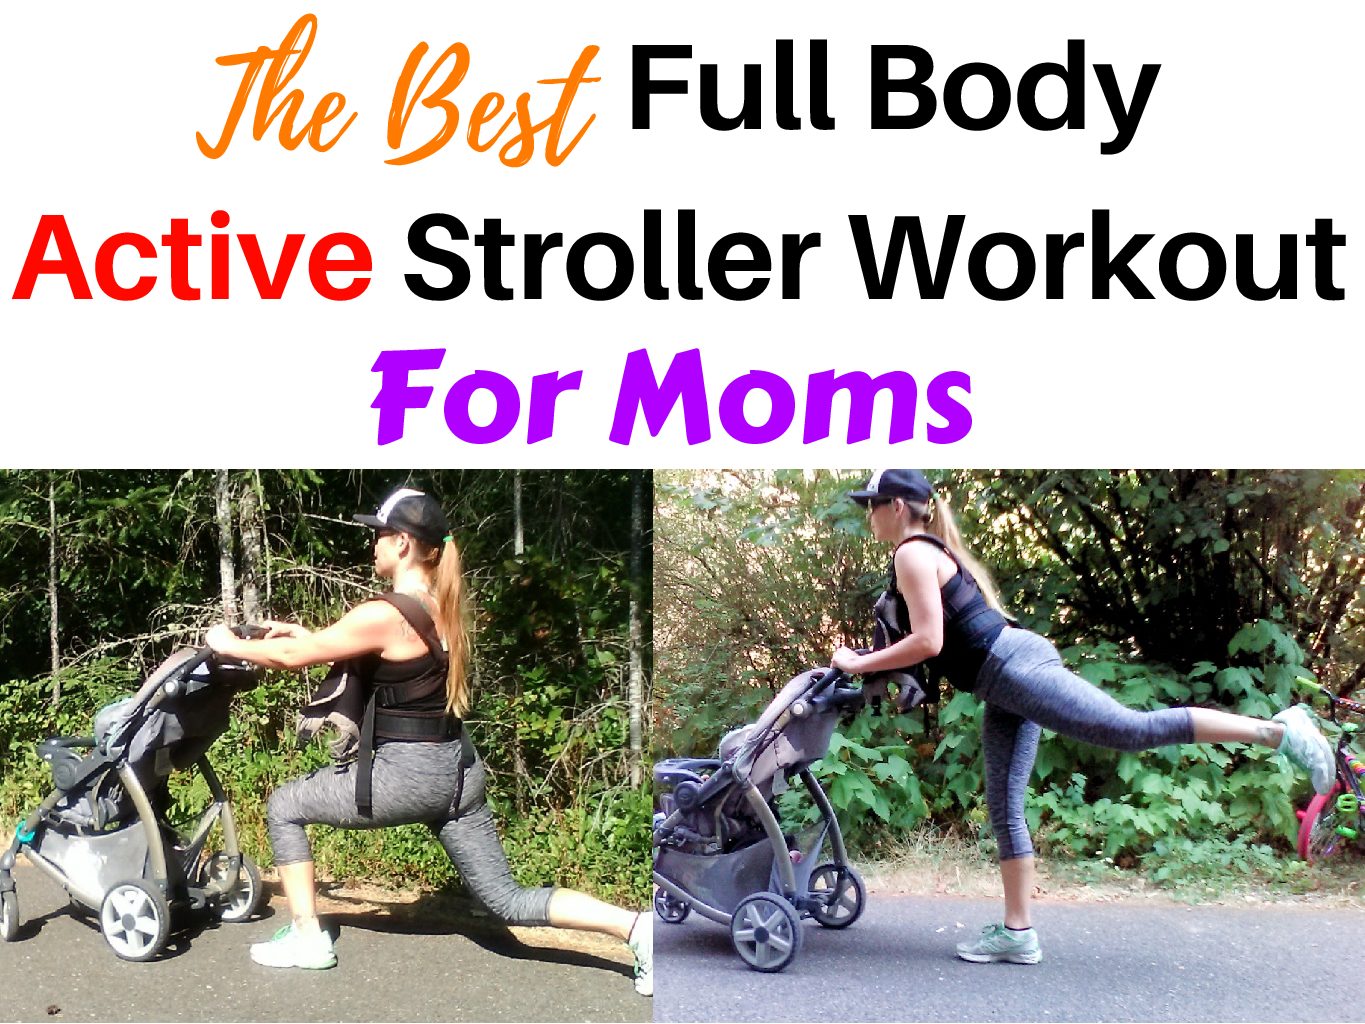 The Best Full Body Active Stroller Workout For Moms